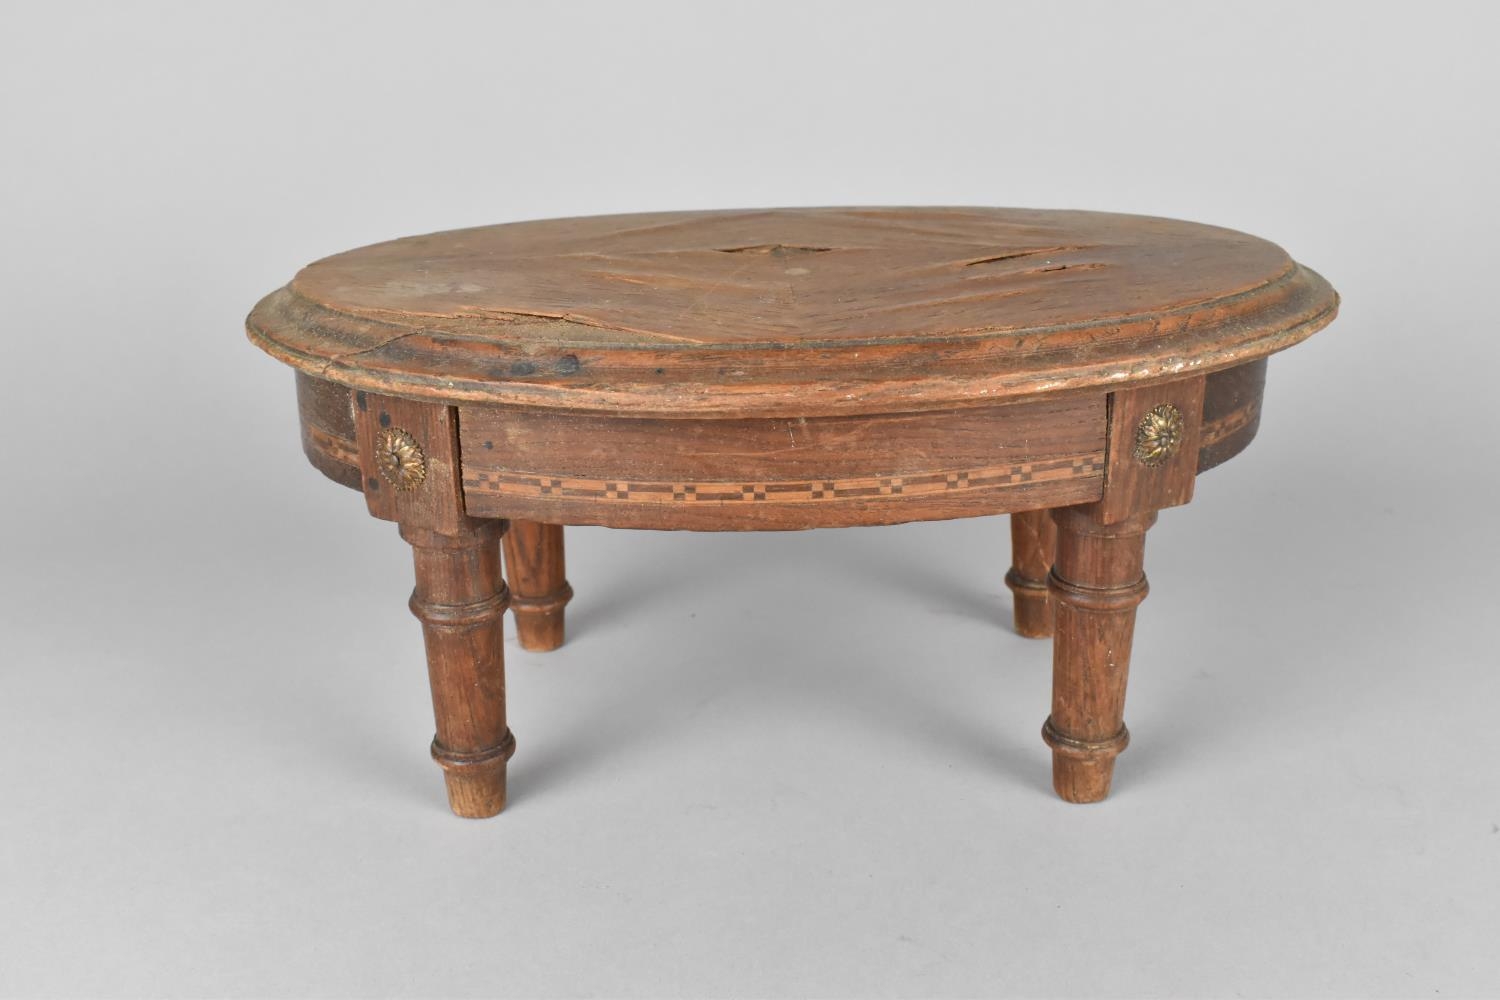 A Small 19th Century Regency Stool with Oval Top Having Parquetry Trim and Brass Sunburst Mounts - Image 2 of 3